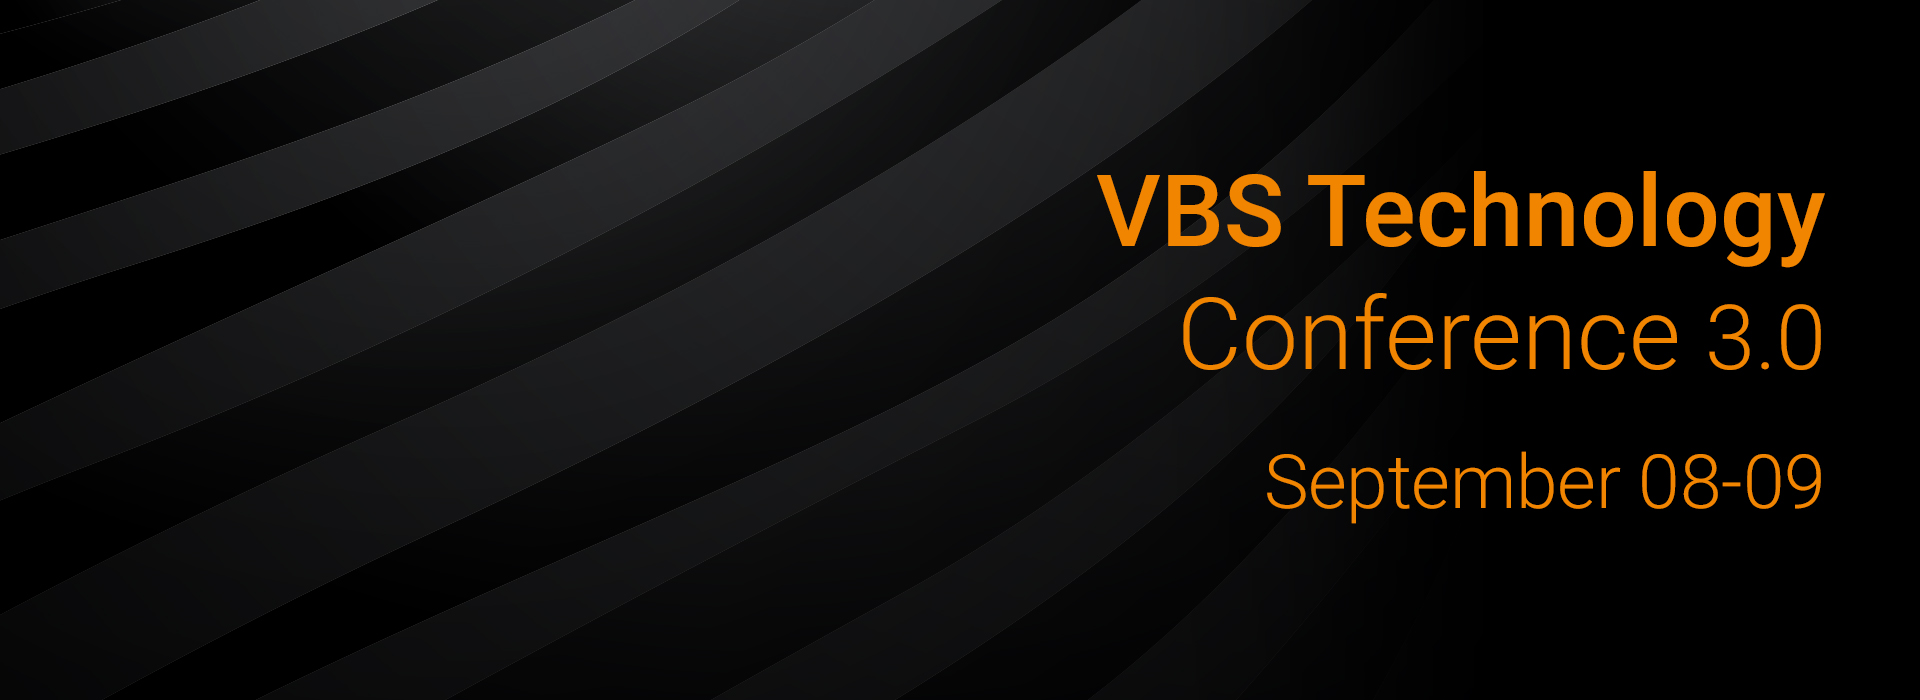 major_new_initiatives_for_vbs4__join_the_vbs_technology_conference_30_september_08_09